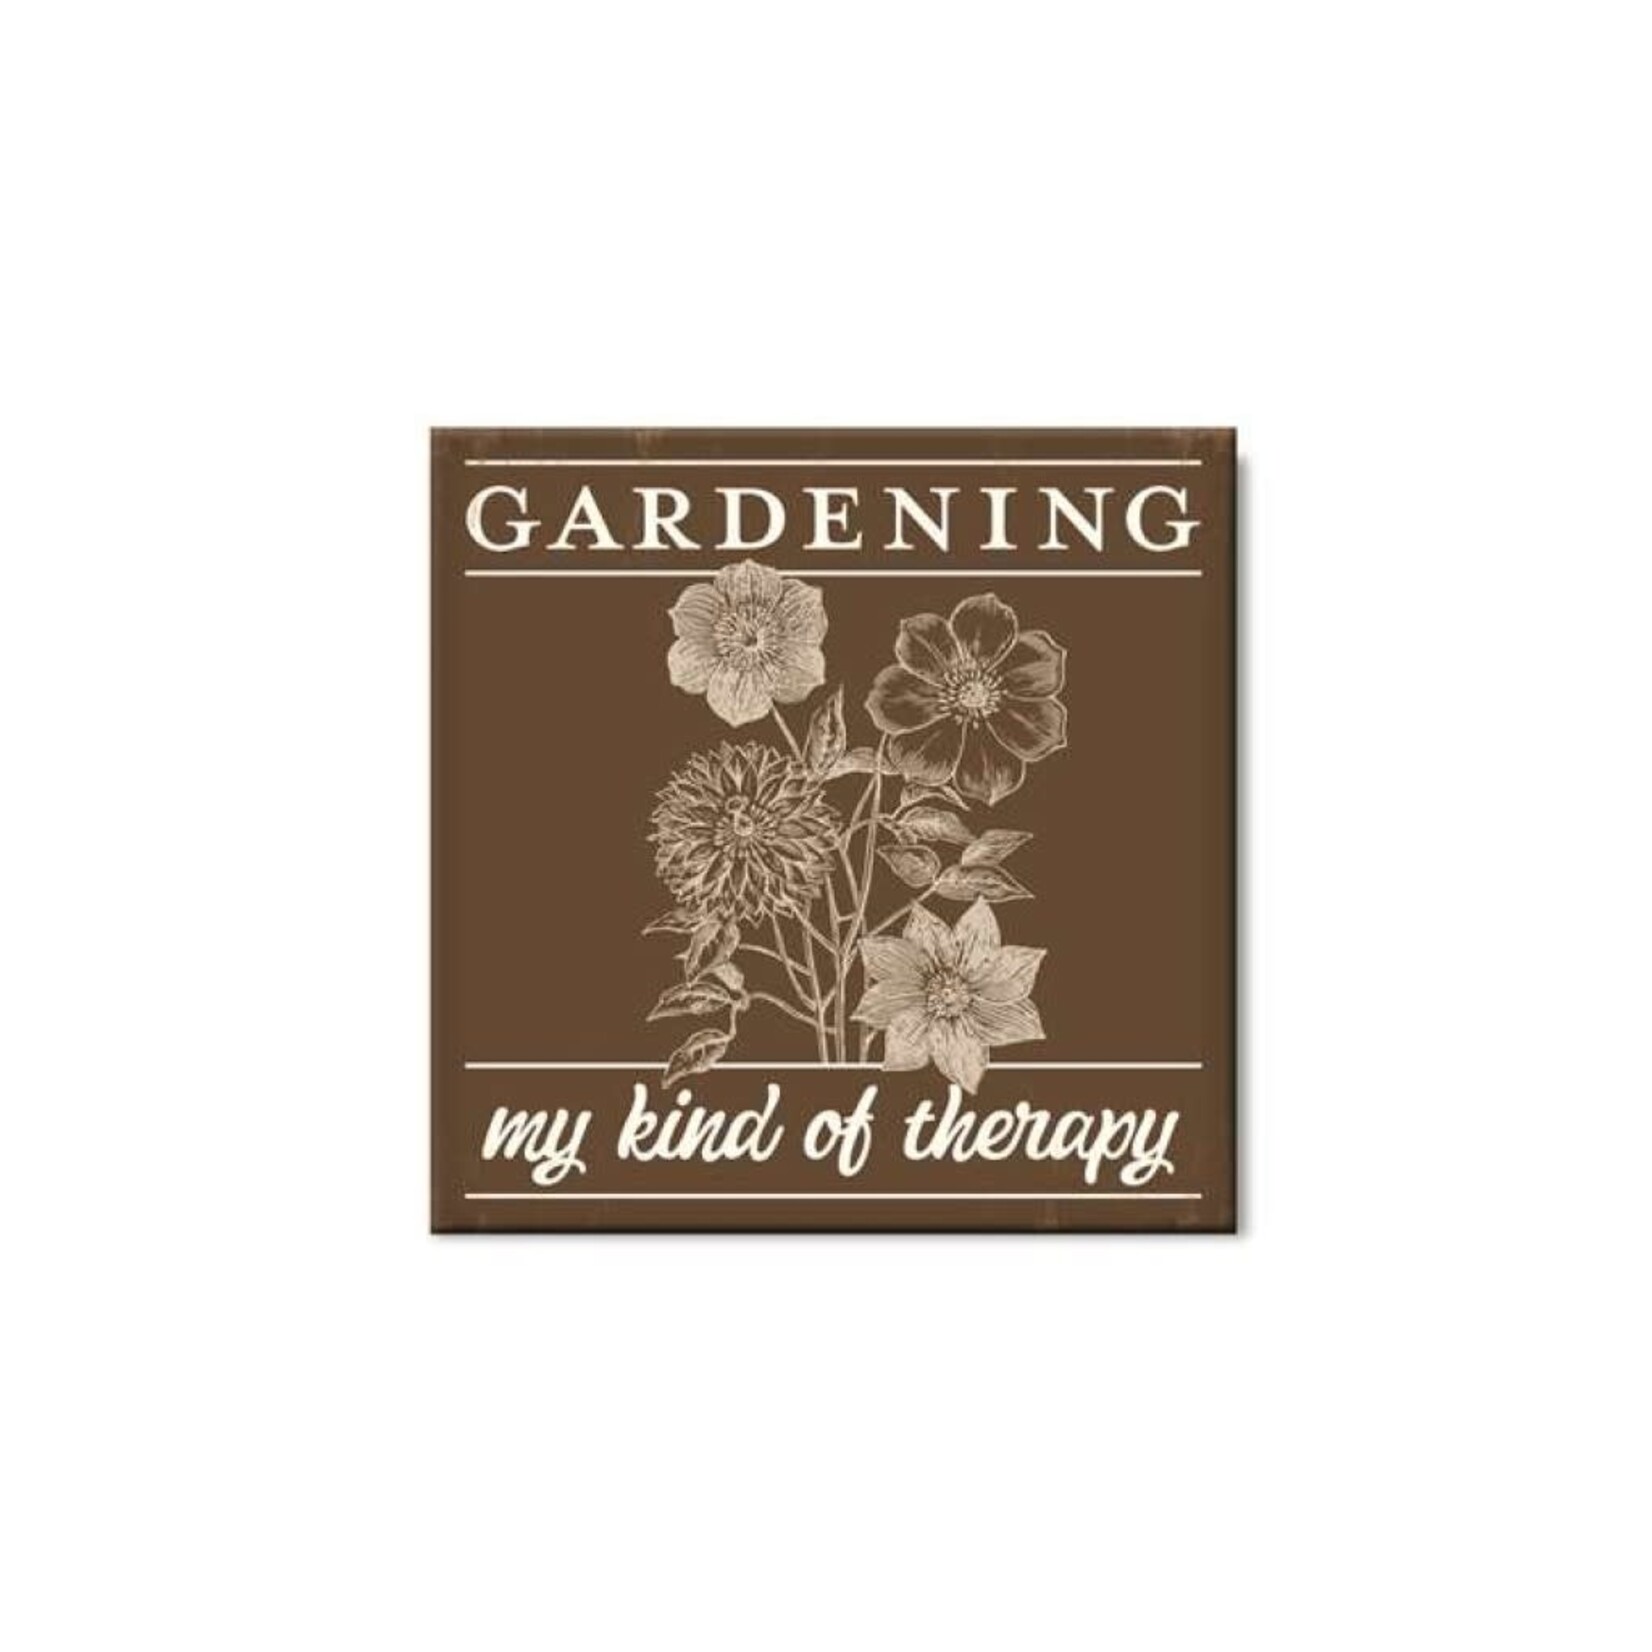 Gardening - My Kind of Therapy 6x6